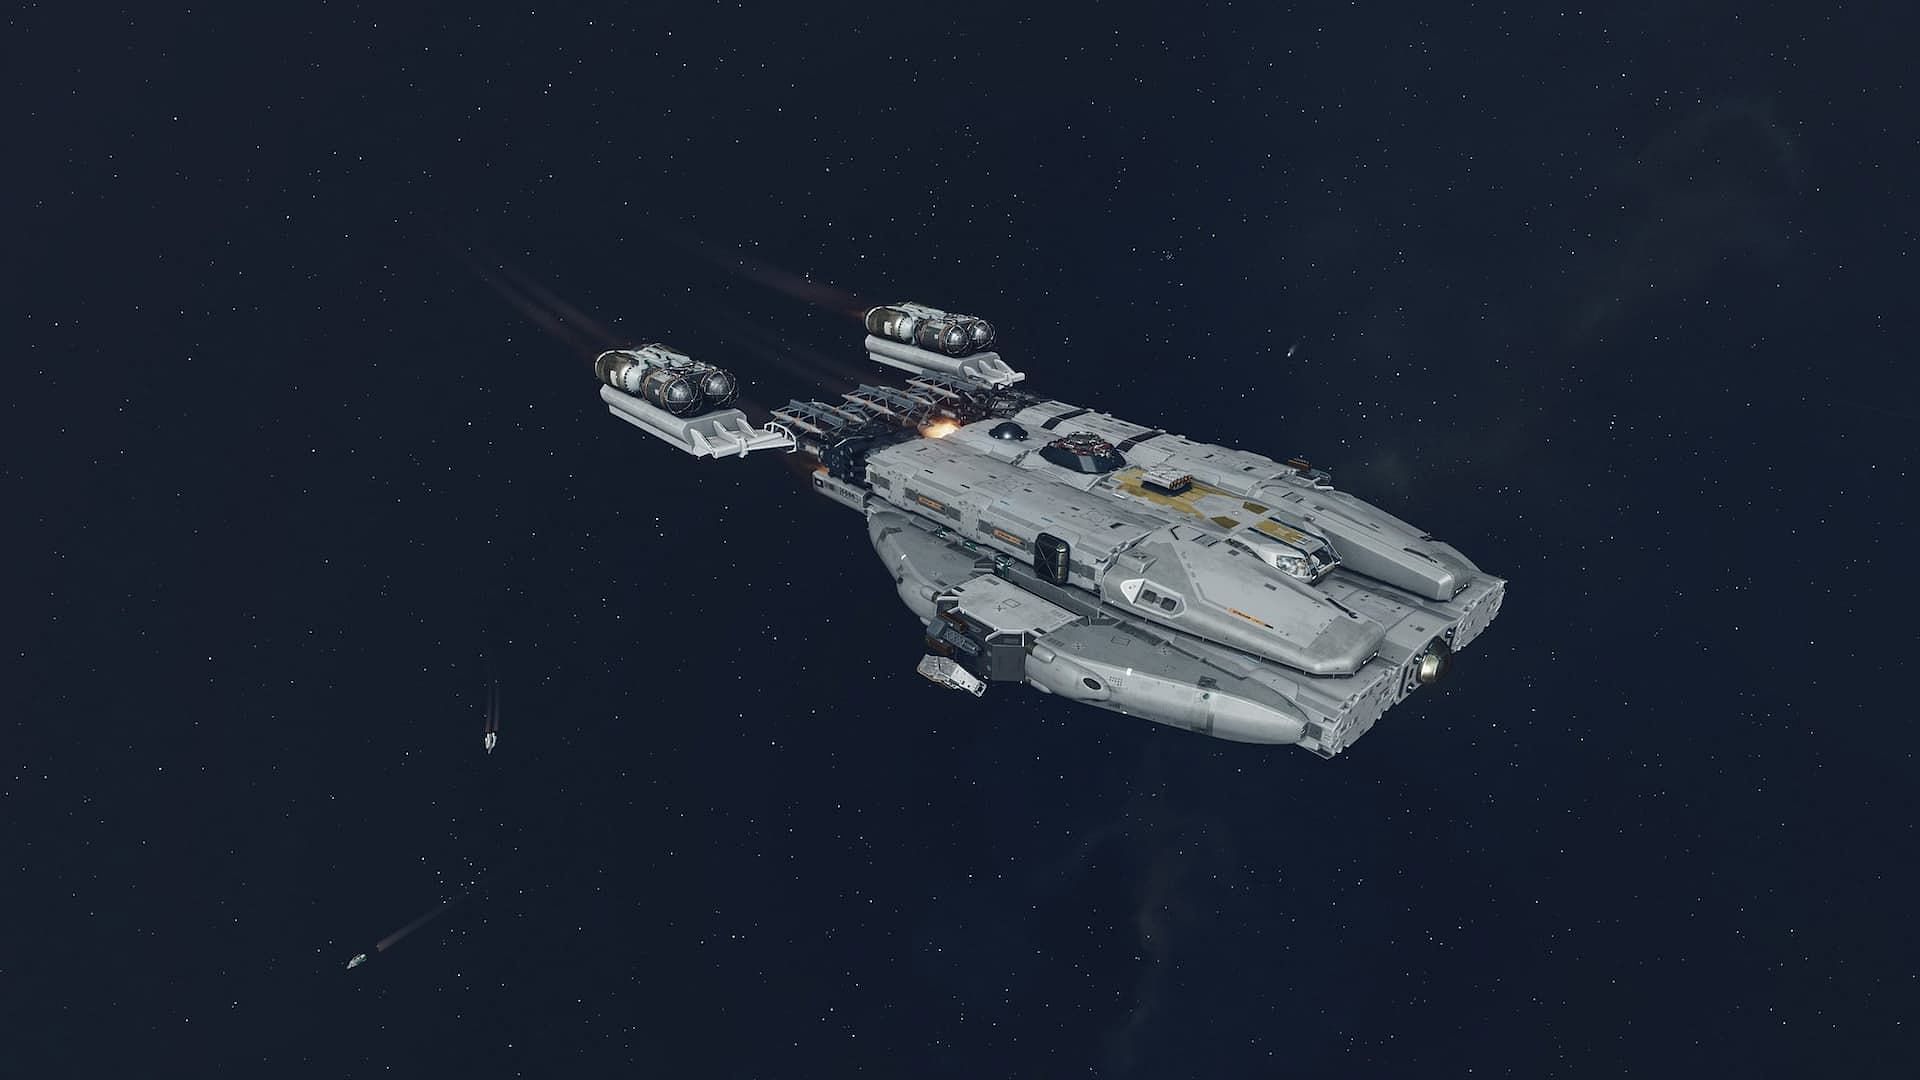 The ship-building feature in Starfield allows you to replicate the Enterprise from Star Trek (Image via Bethesda)